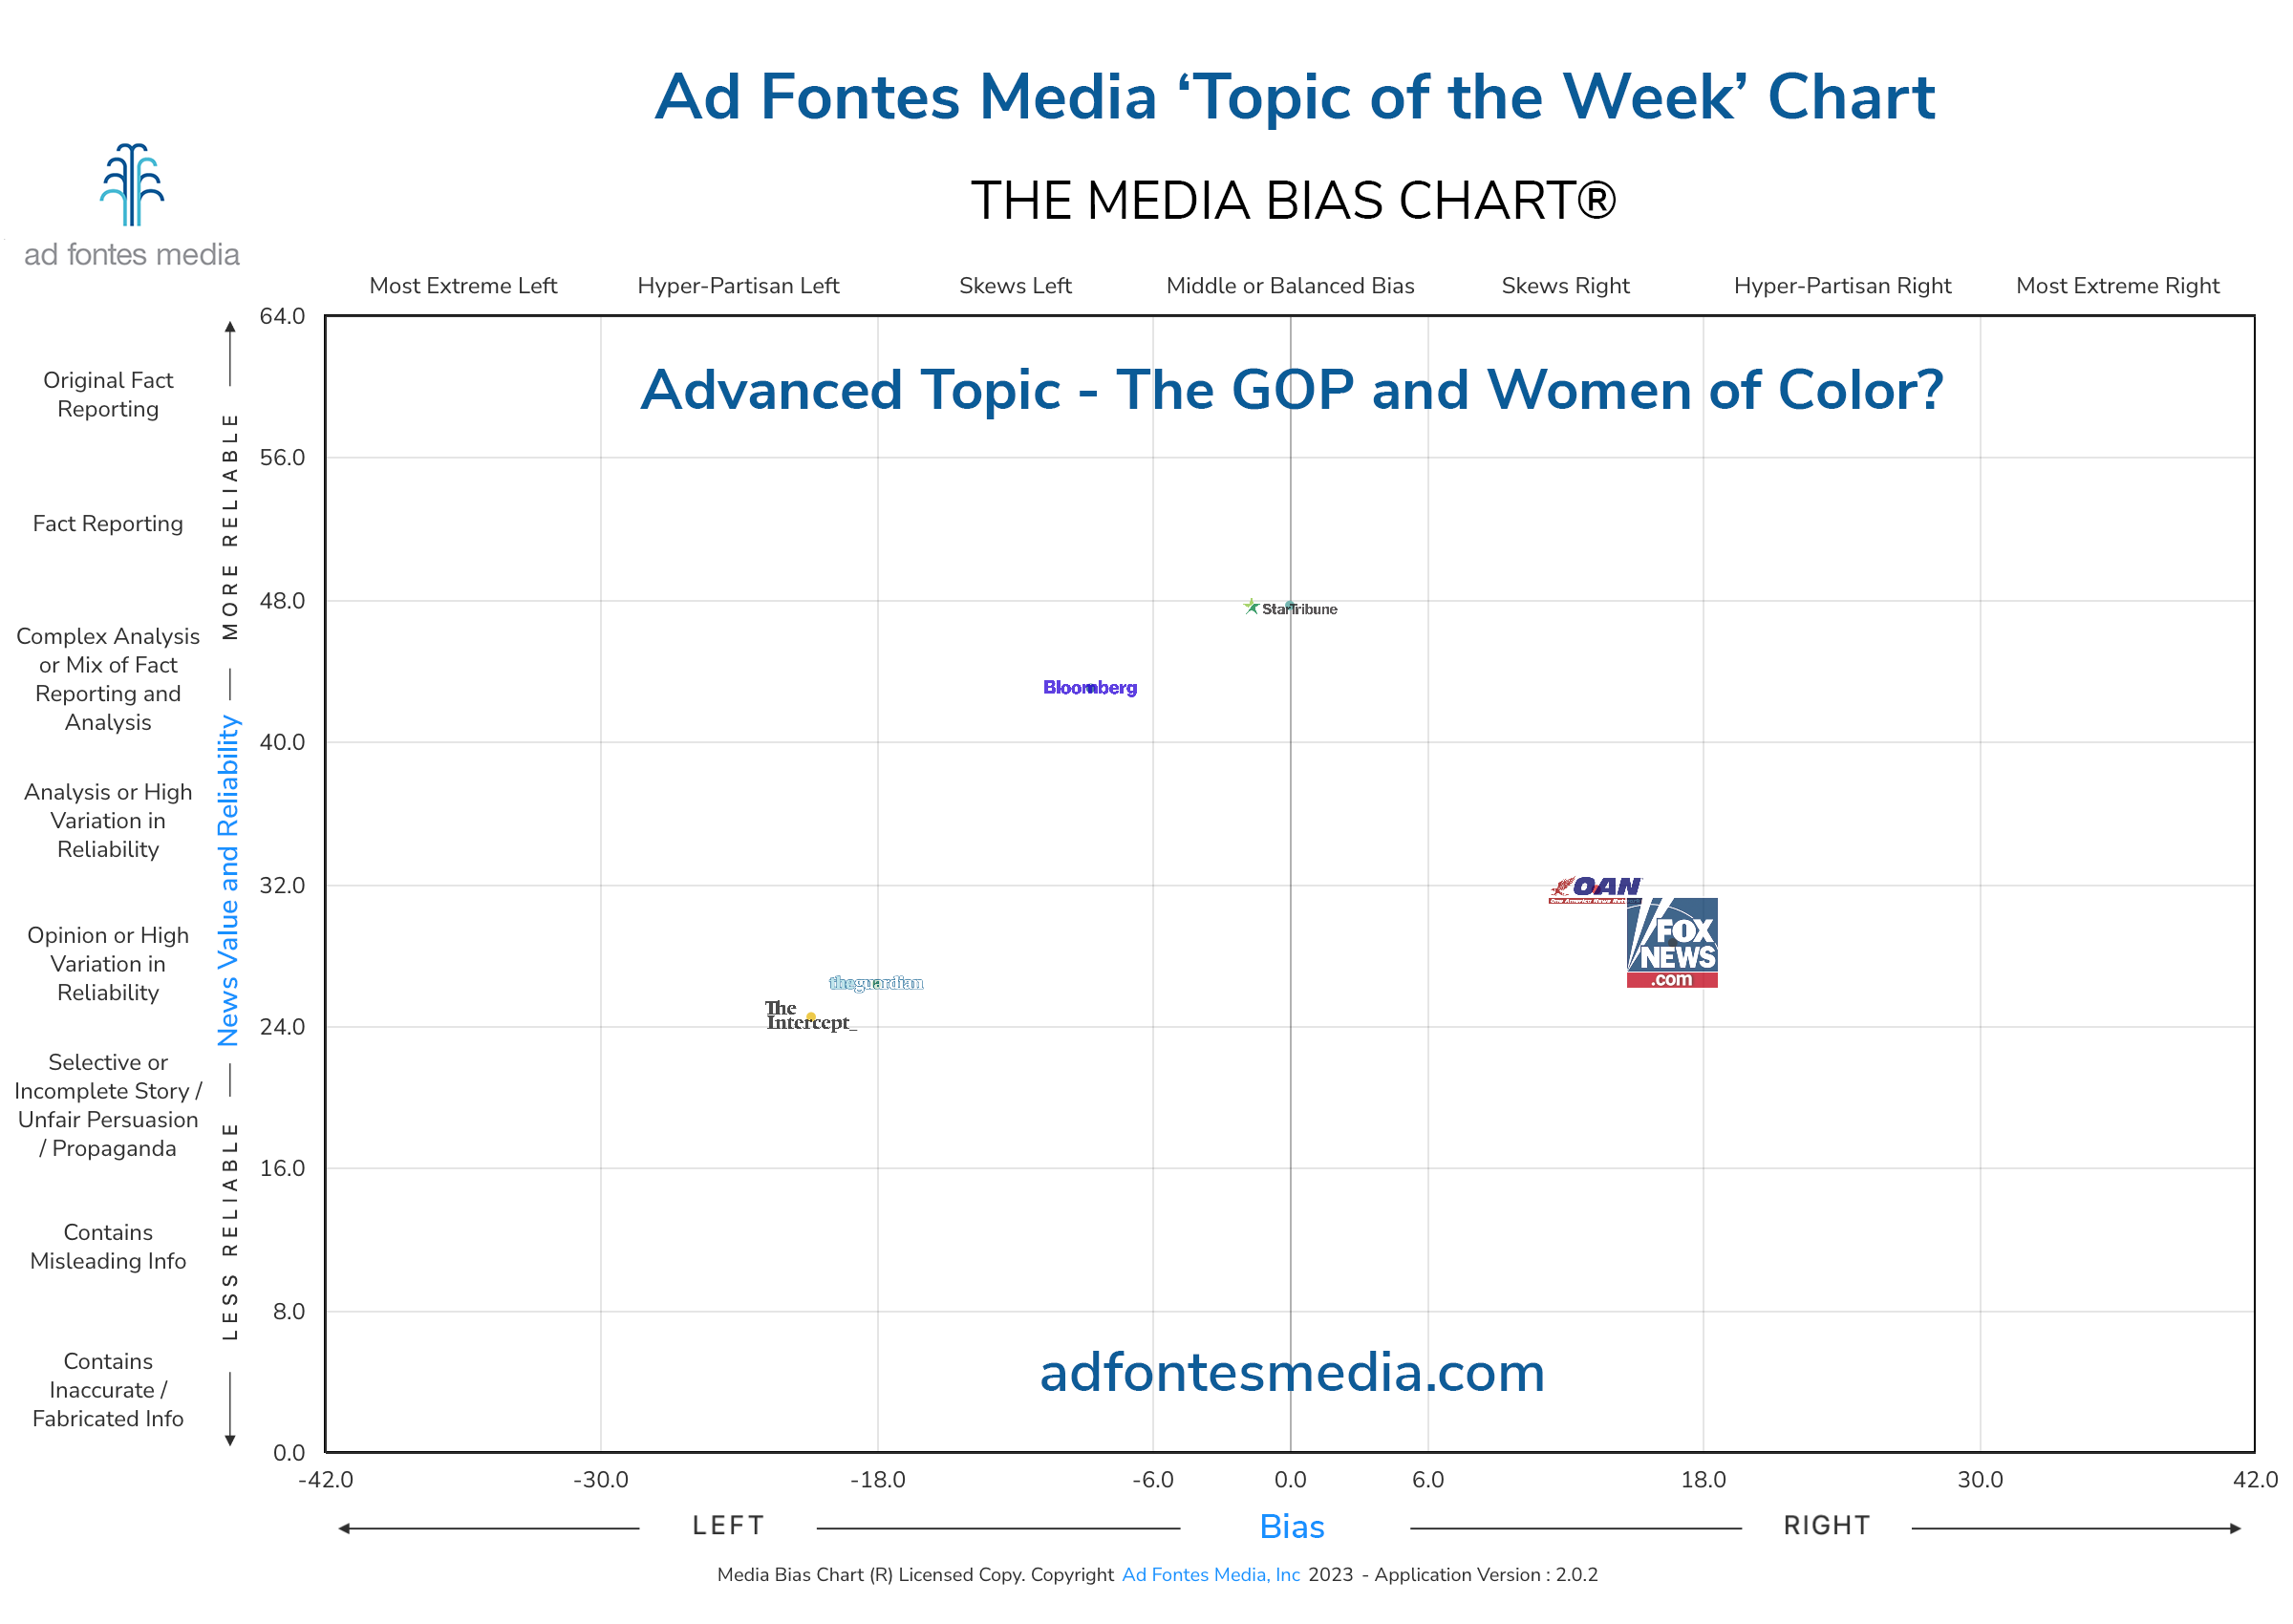 Scores of the The GOP and Women of Color? articles on the chart